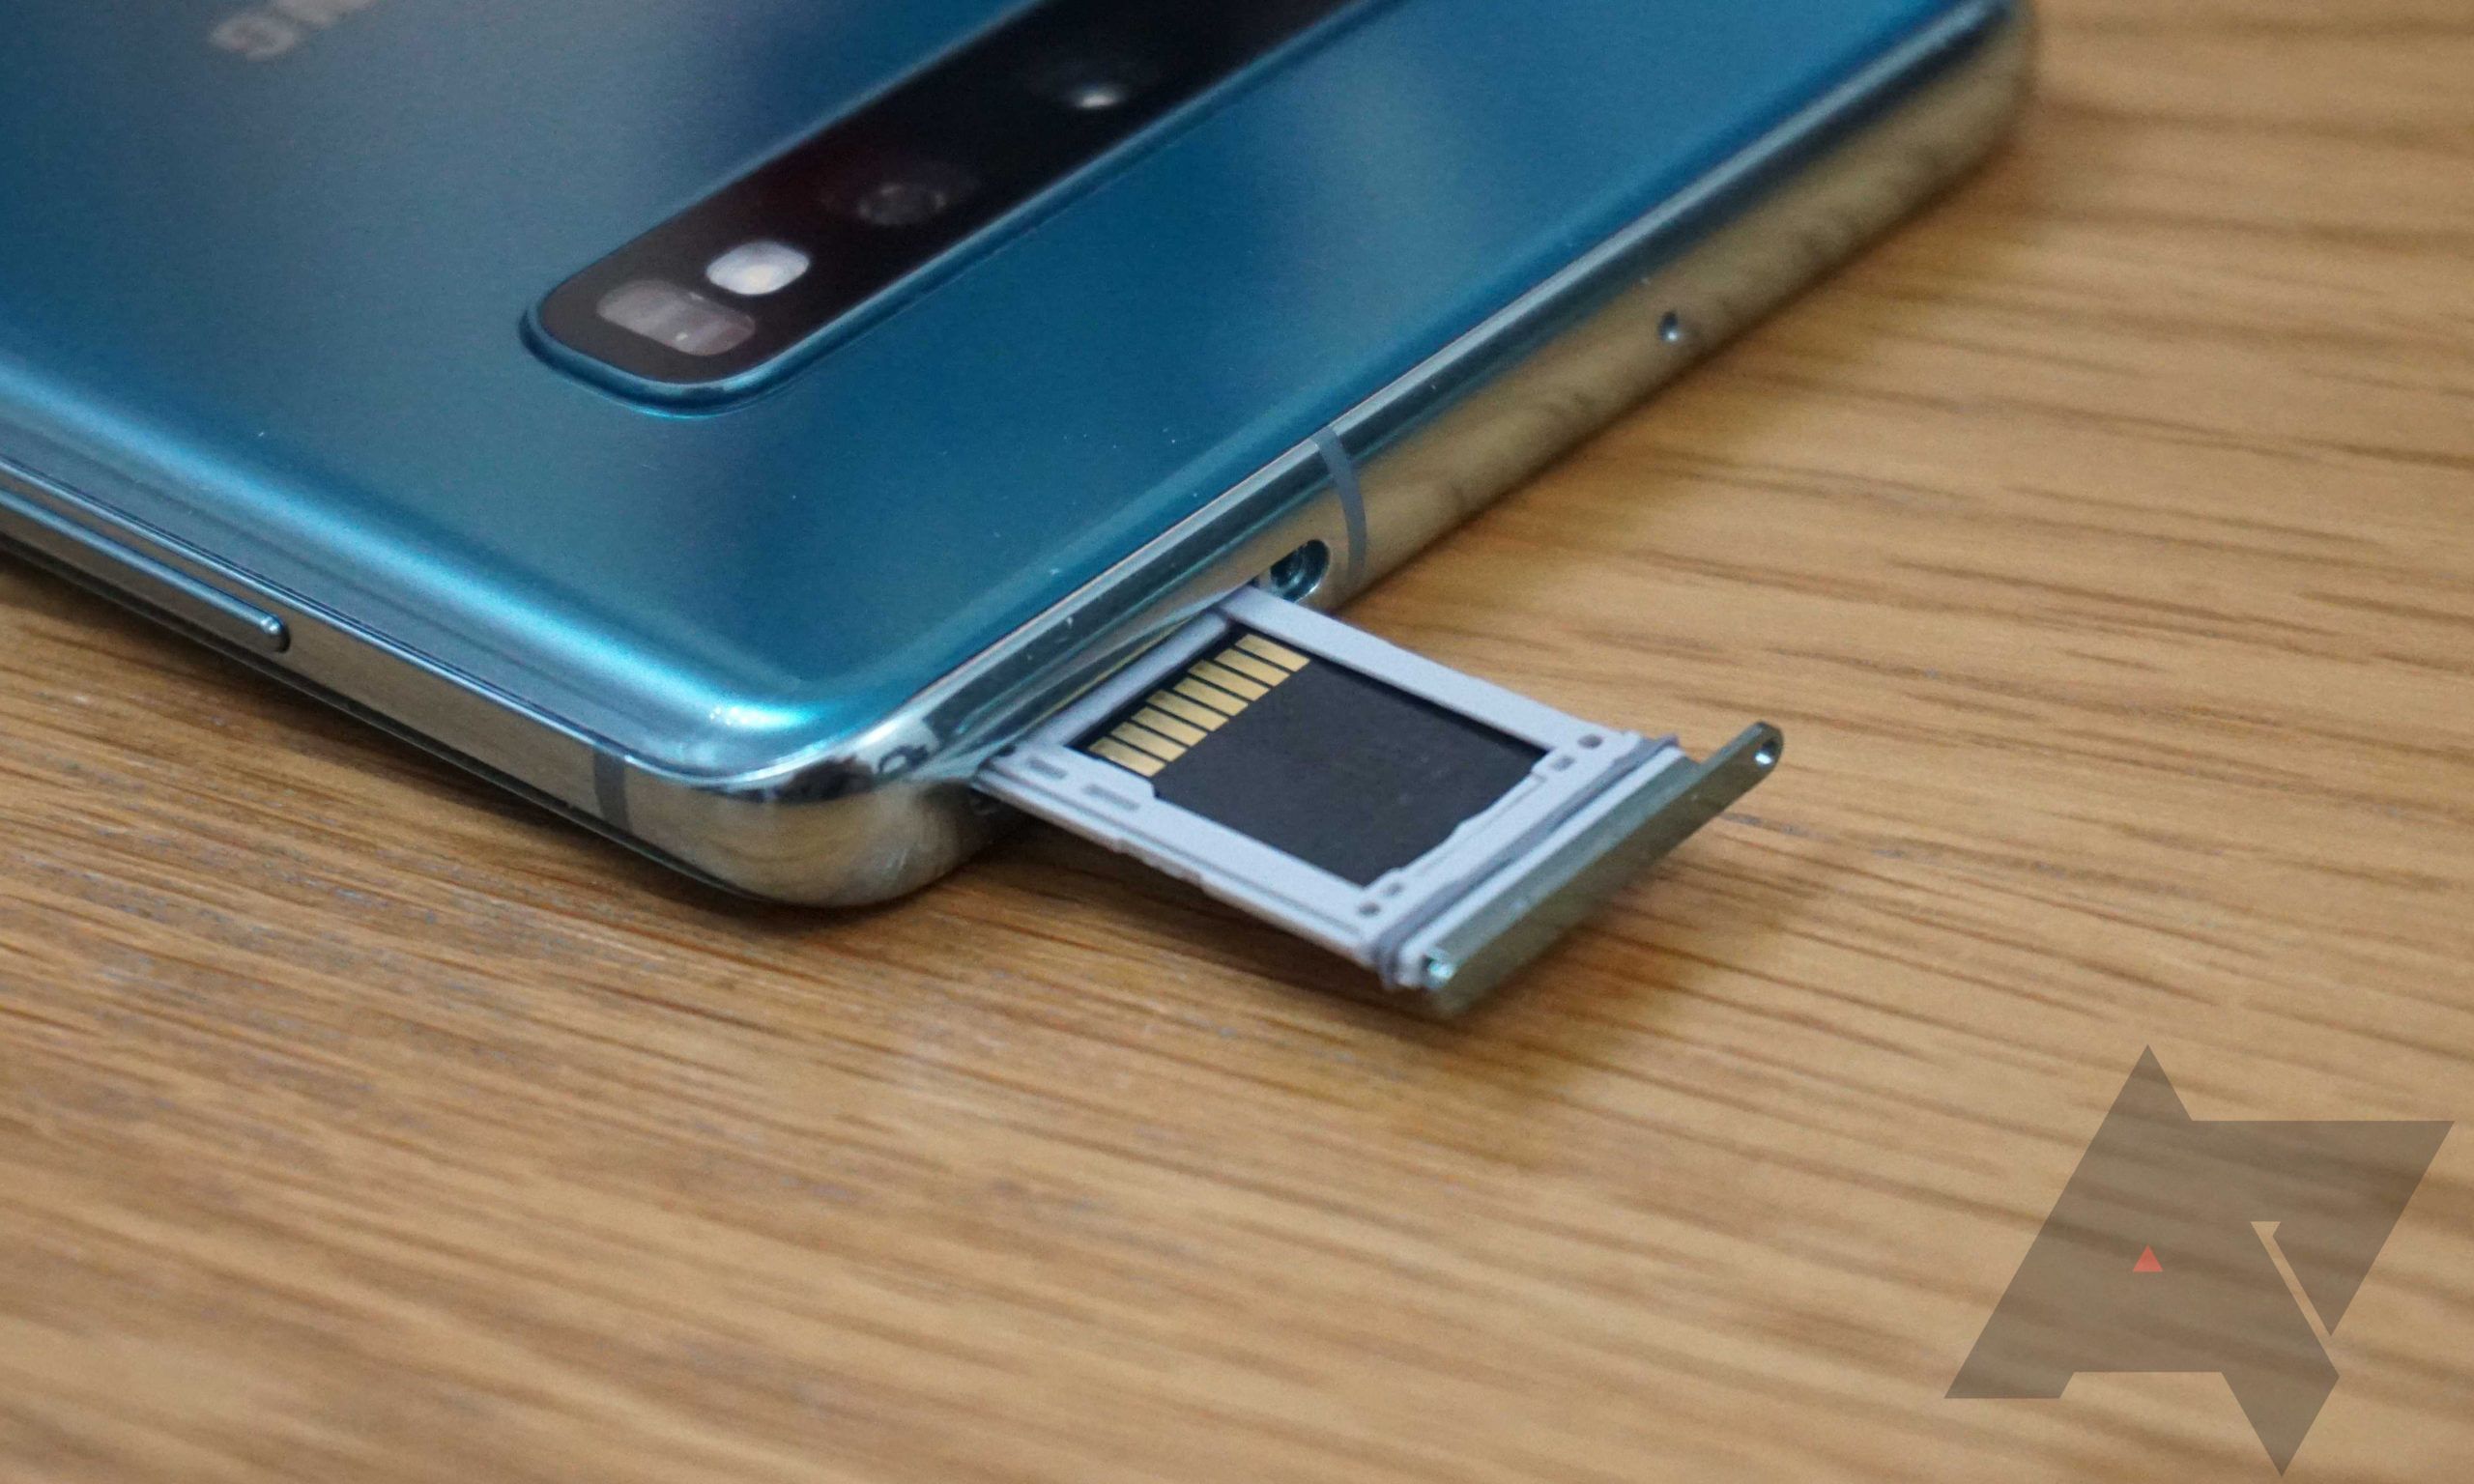 extended sd card slot on Android phone